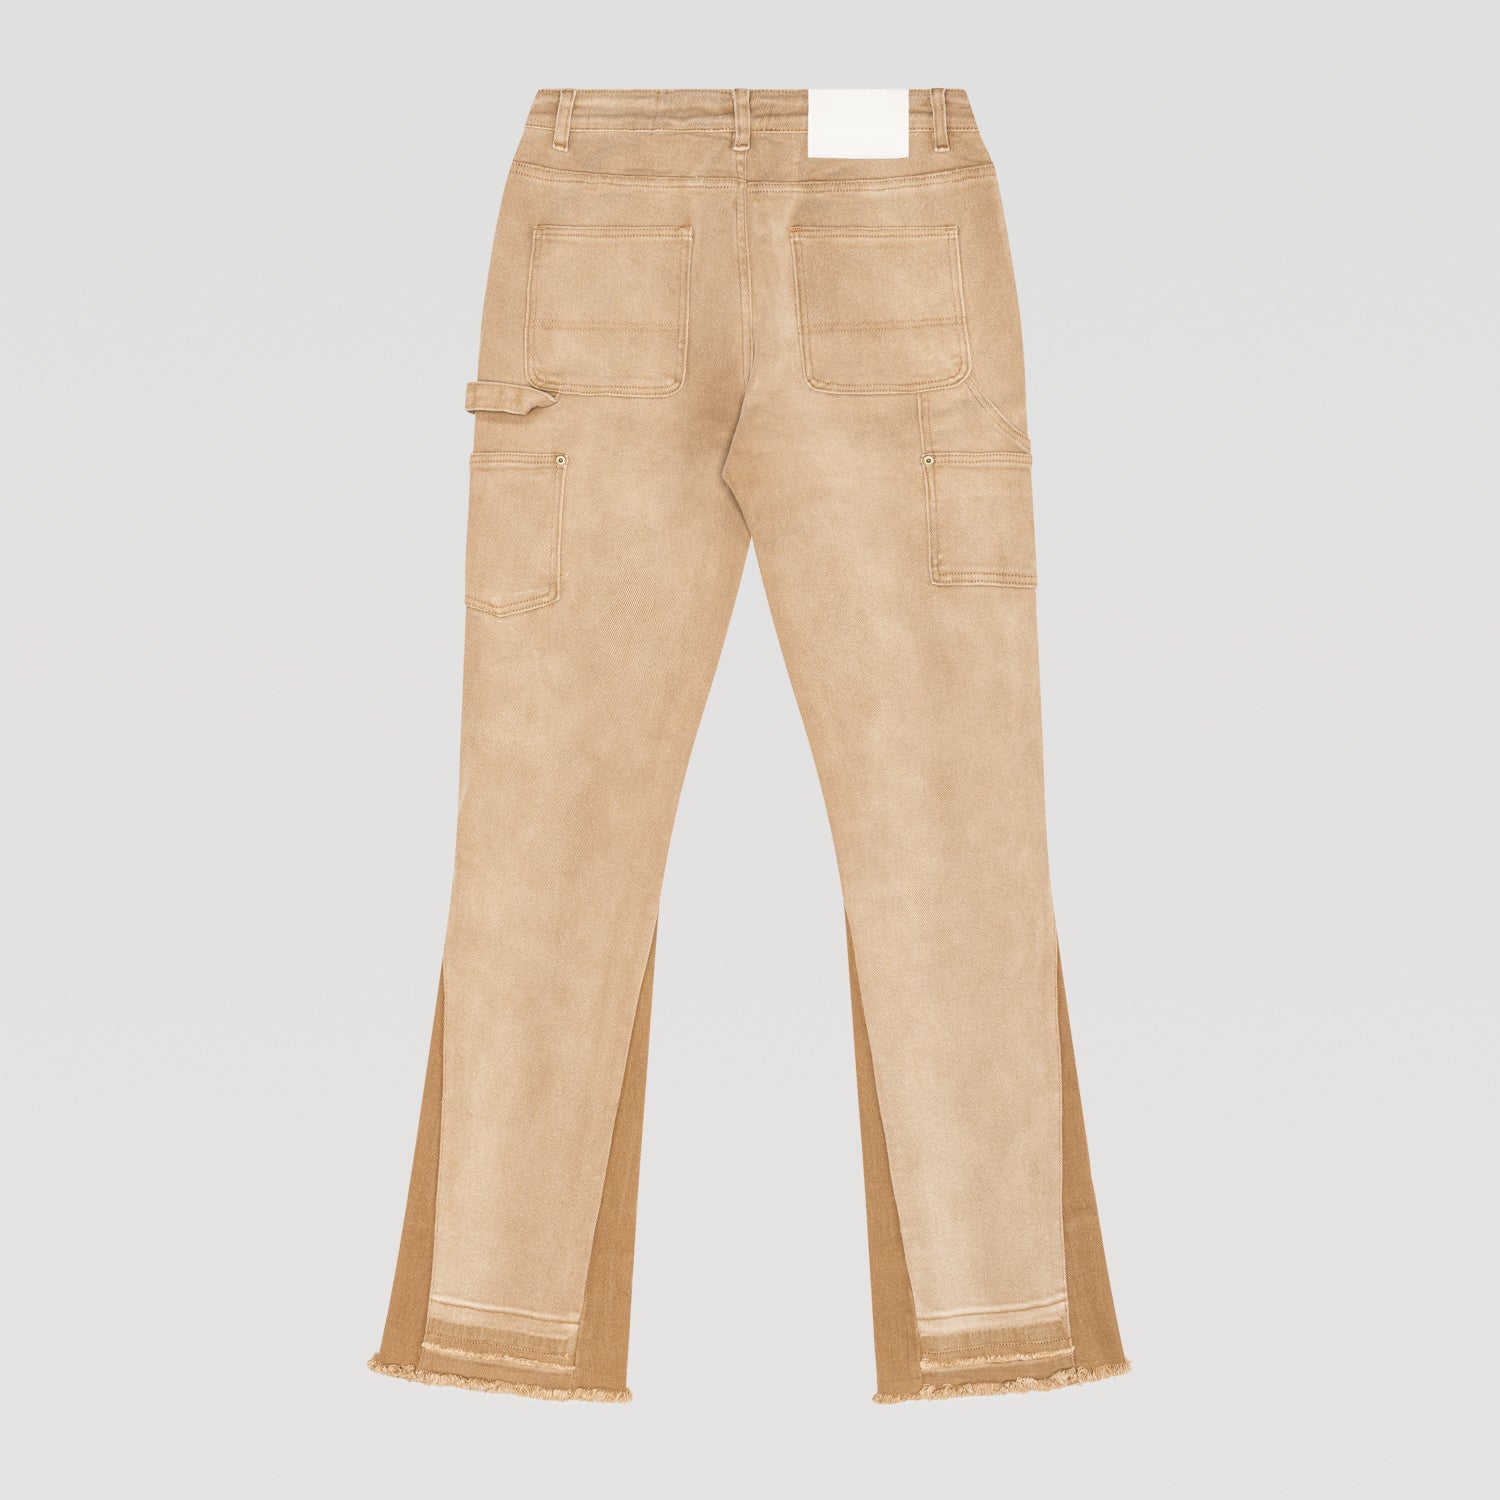 PERFECT BEIGE FLARE JEANS